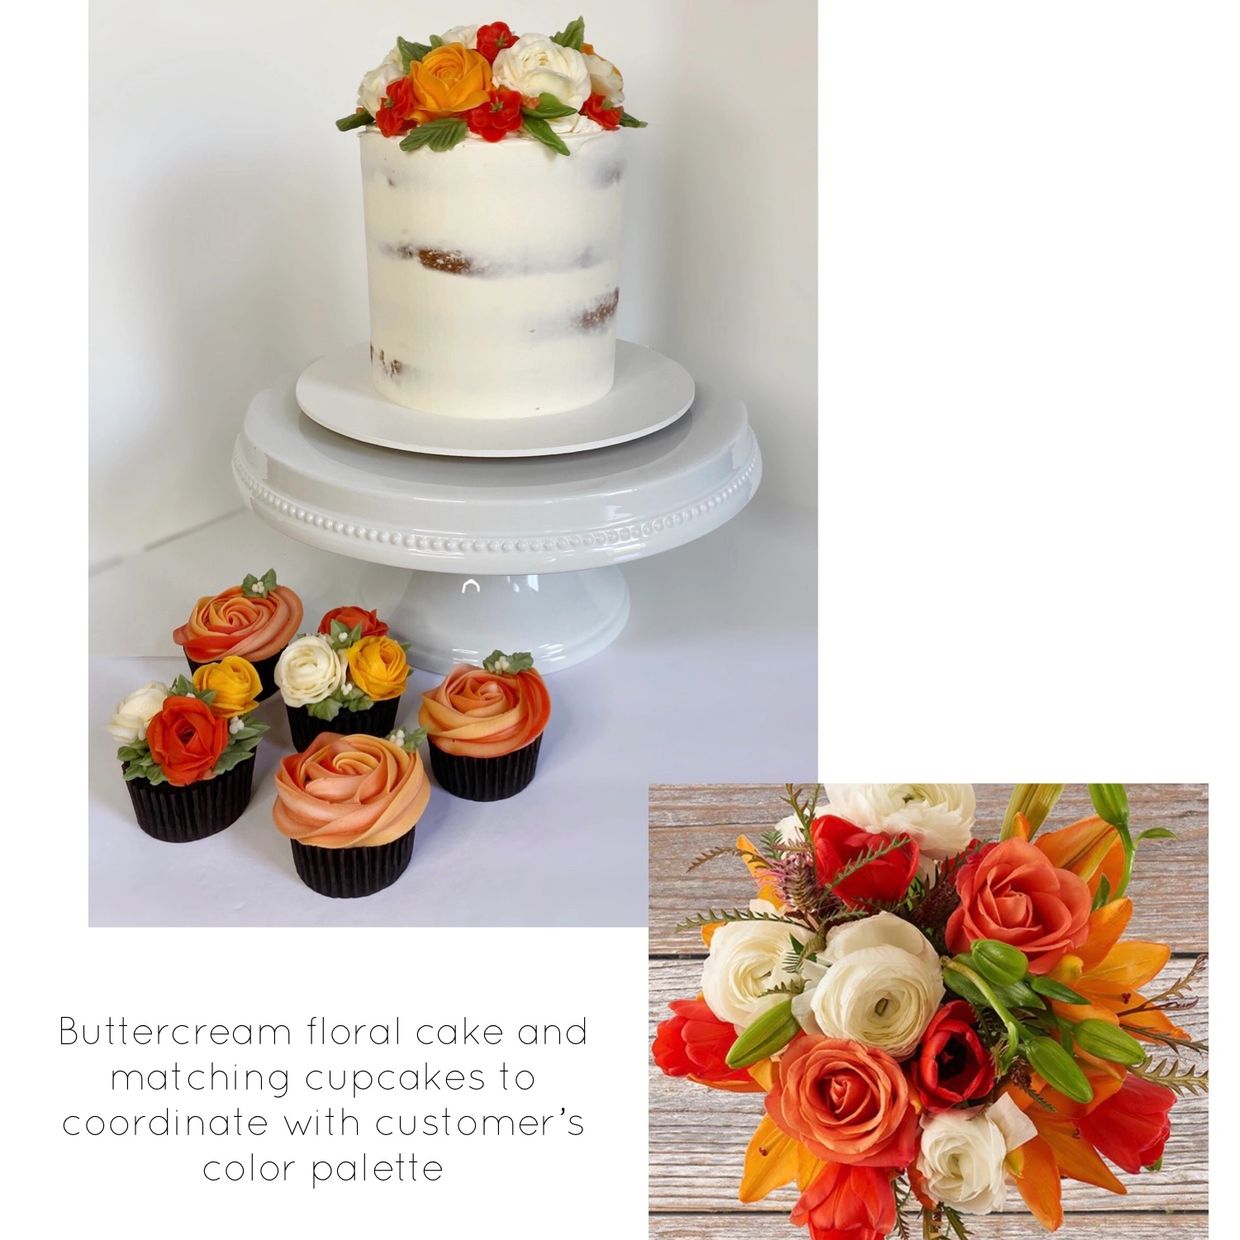 Beautiful buttercream flower cake on white pedestal with flower cupcakes at base for a wedding 